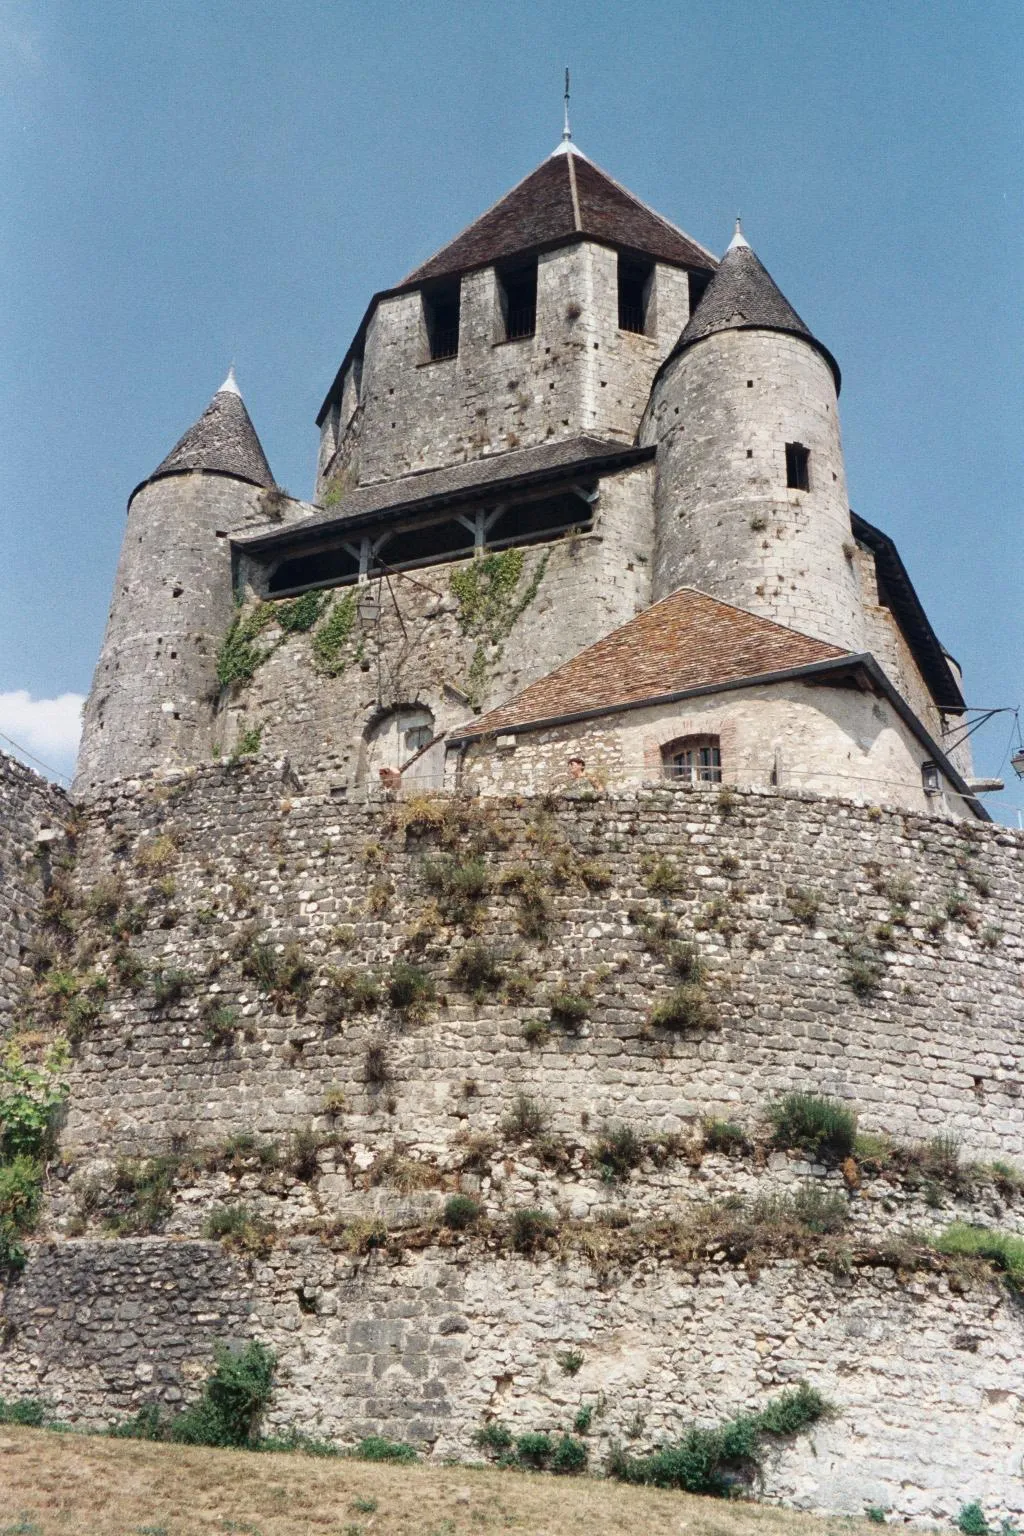 Photo showing: The César tower, in the town of Provins. Taken in Provins, France, scanned from an argentic reel.